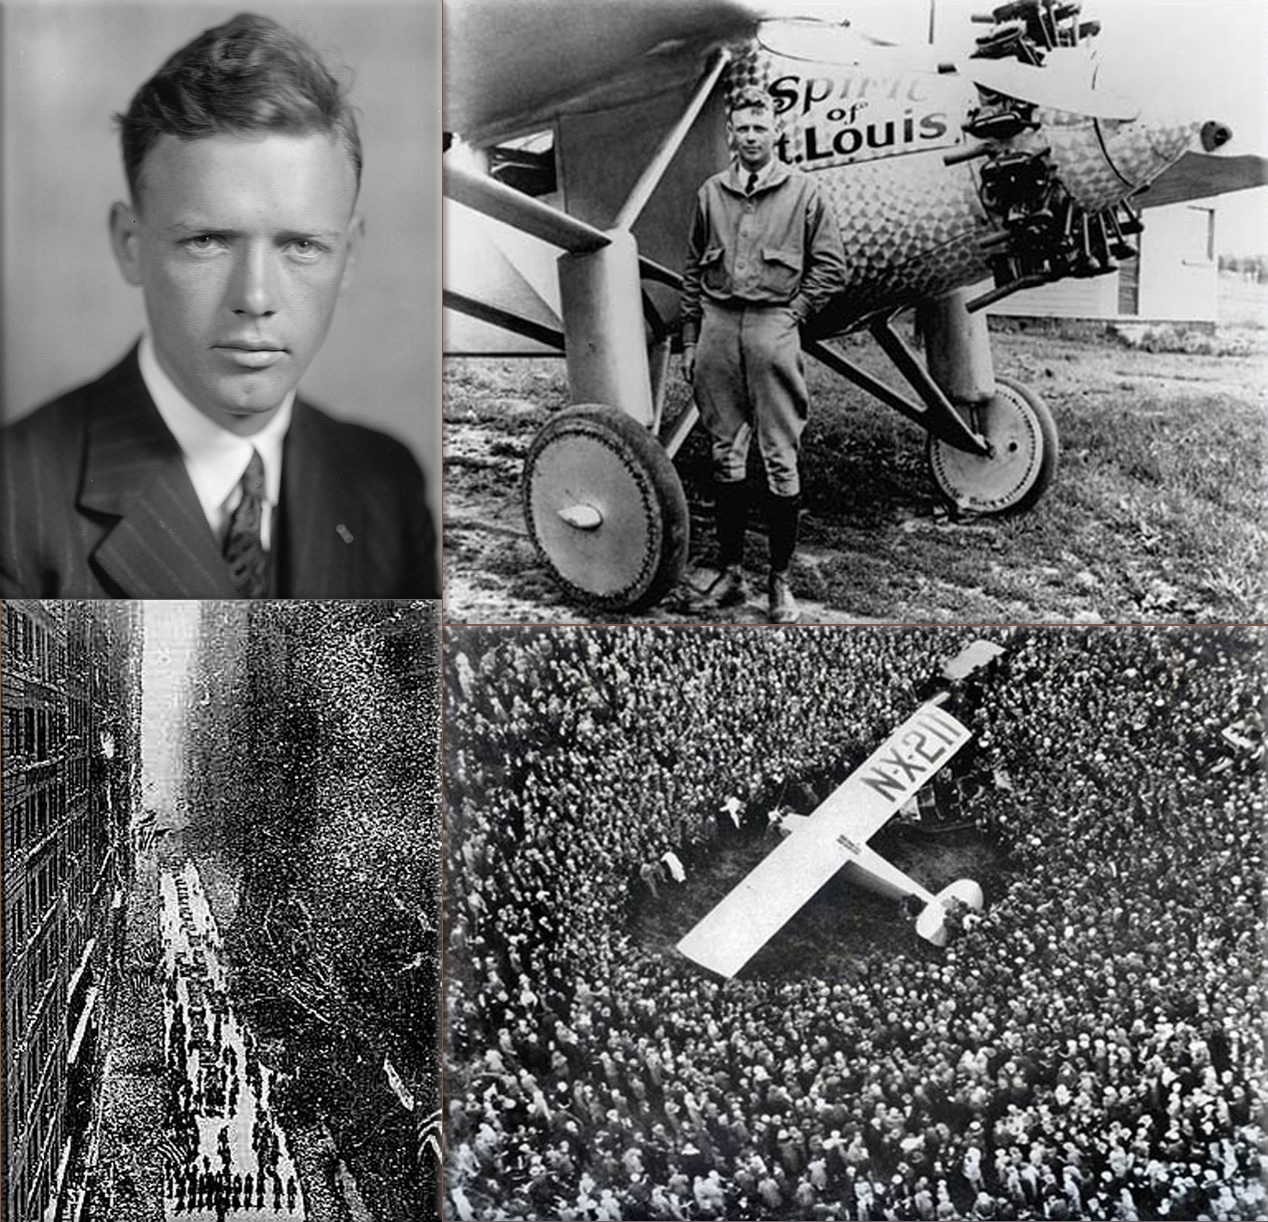 Charles Lindbergh (February 4, 1902 – August 26, 1974) (nicknamed 'Slim', 'Lucky Lindy' and 'The Lone Eagle') was an American aviator, author, inventor, explorer, and social activist (Lindbergh emerged suddenly from virtual obscurity to instantaneous world fame as the result of his Orteig Prize-winning solo non-stop flight on May 20–21, 1927, from New York's Long Island to Le Bourget Field in Paris, France, a distance of nearly 3,600 statute miles (5,800 km), in the single-seat, single-engine purpose built Ryan monoplane Spirit of St. Louis)